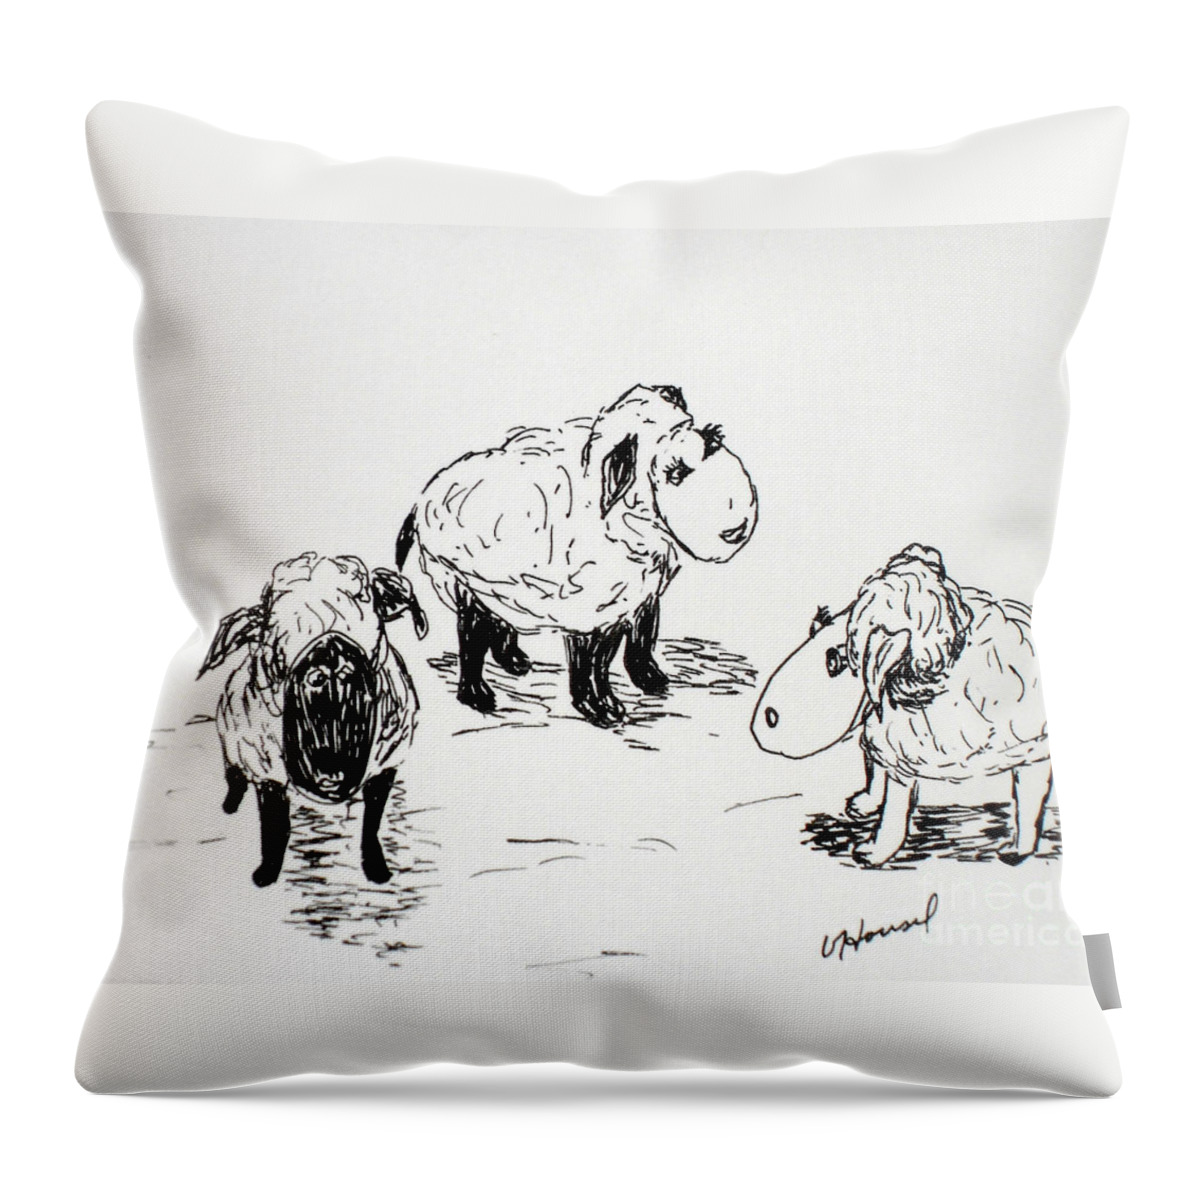 Sheepish Throw Pillow featuring the drawing Sheep Trio by Vicki Housel